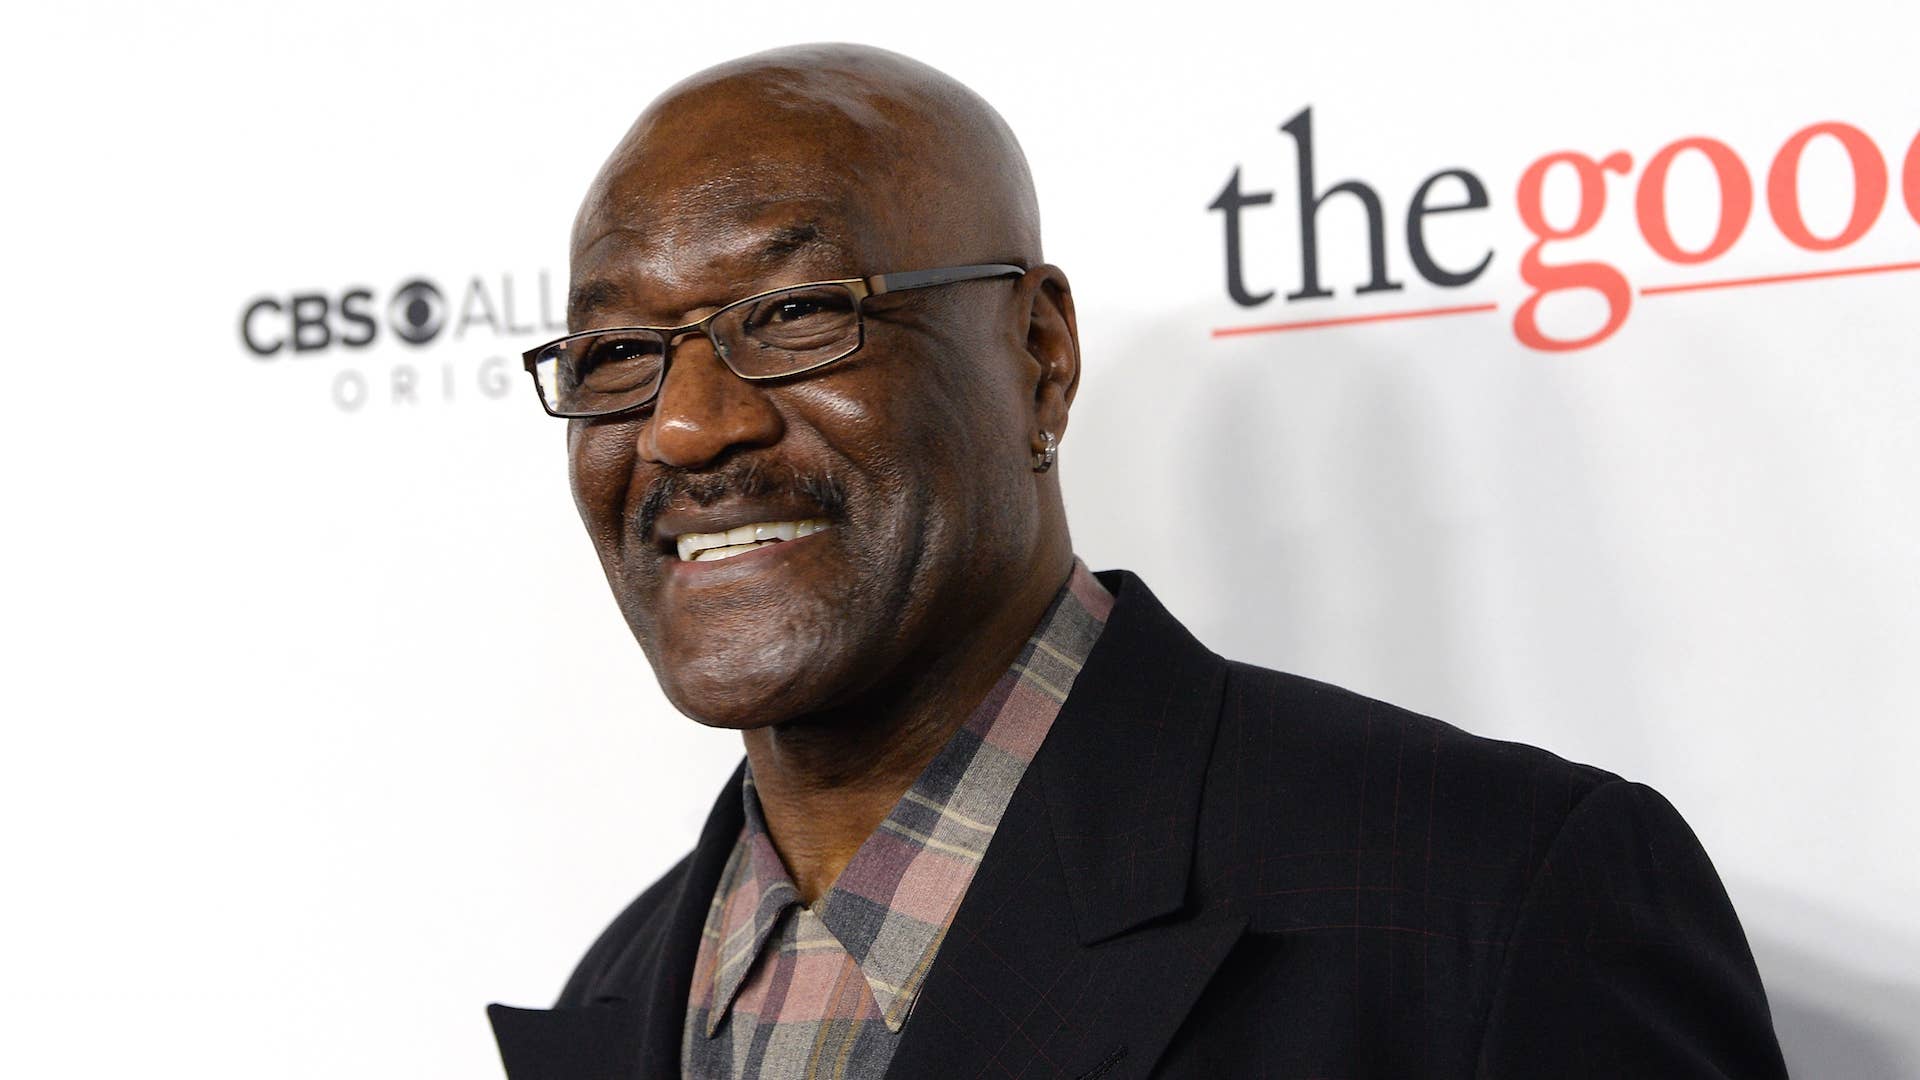 Delroy Lindo attends "The Good Fight" World Premiere